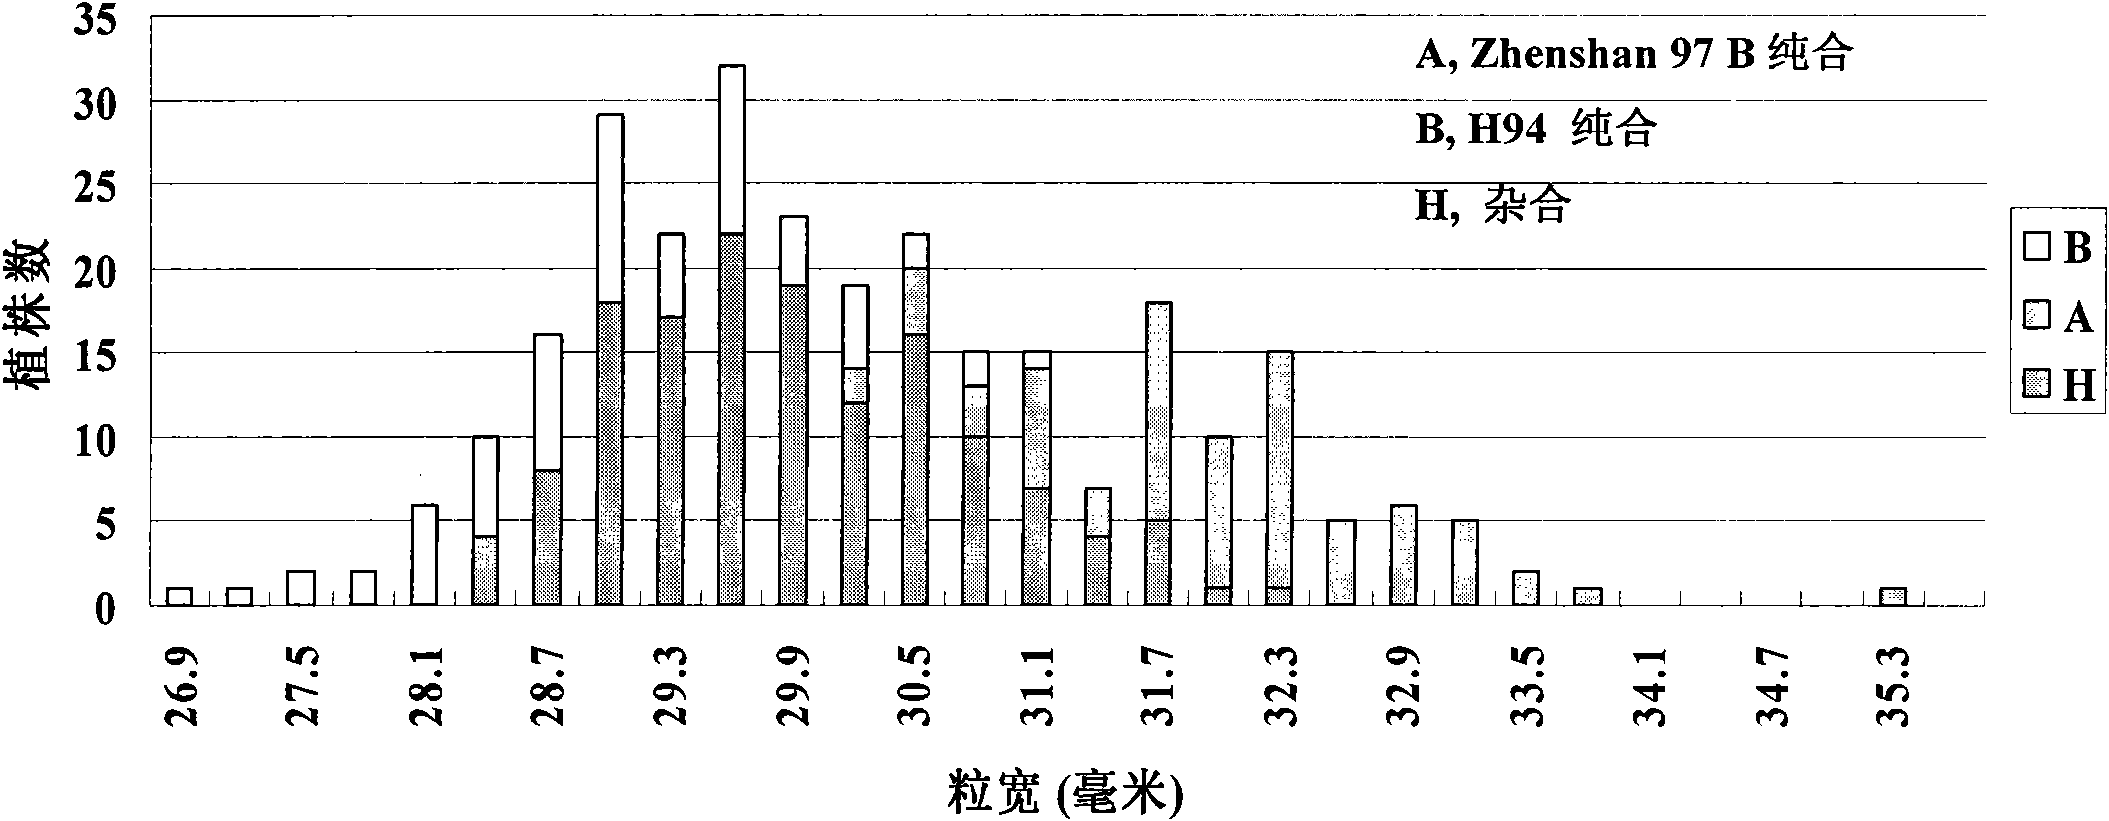 Cloning and application of major gene GS5 capable of controlling width and weight of rice grain